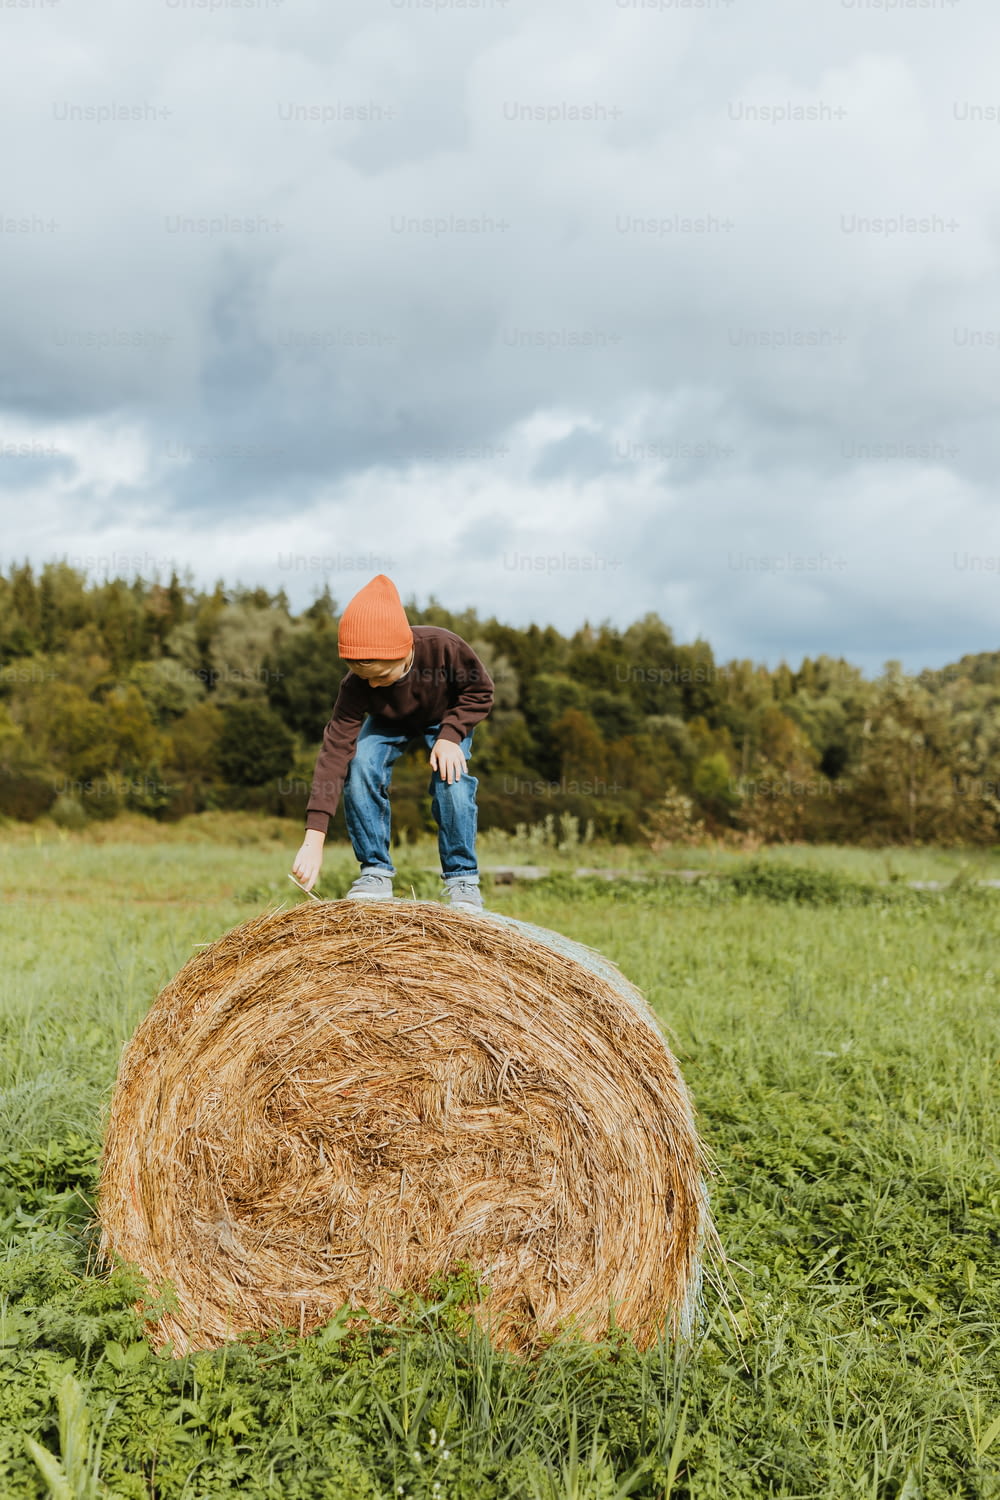 a person standing on top of a hay bale in a field